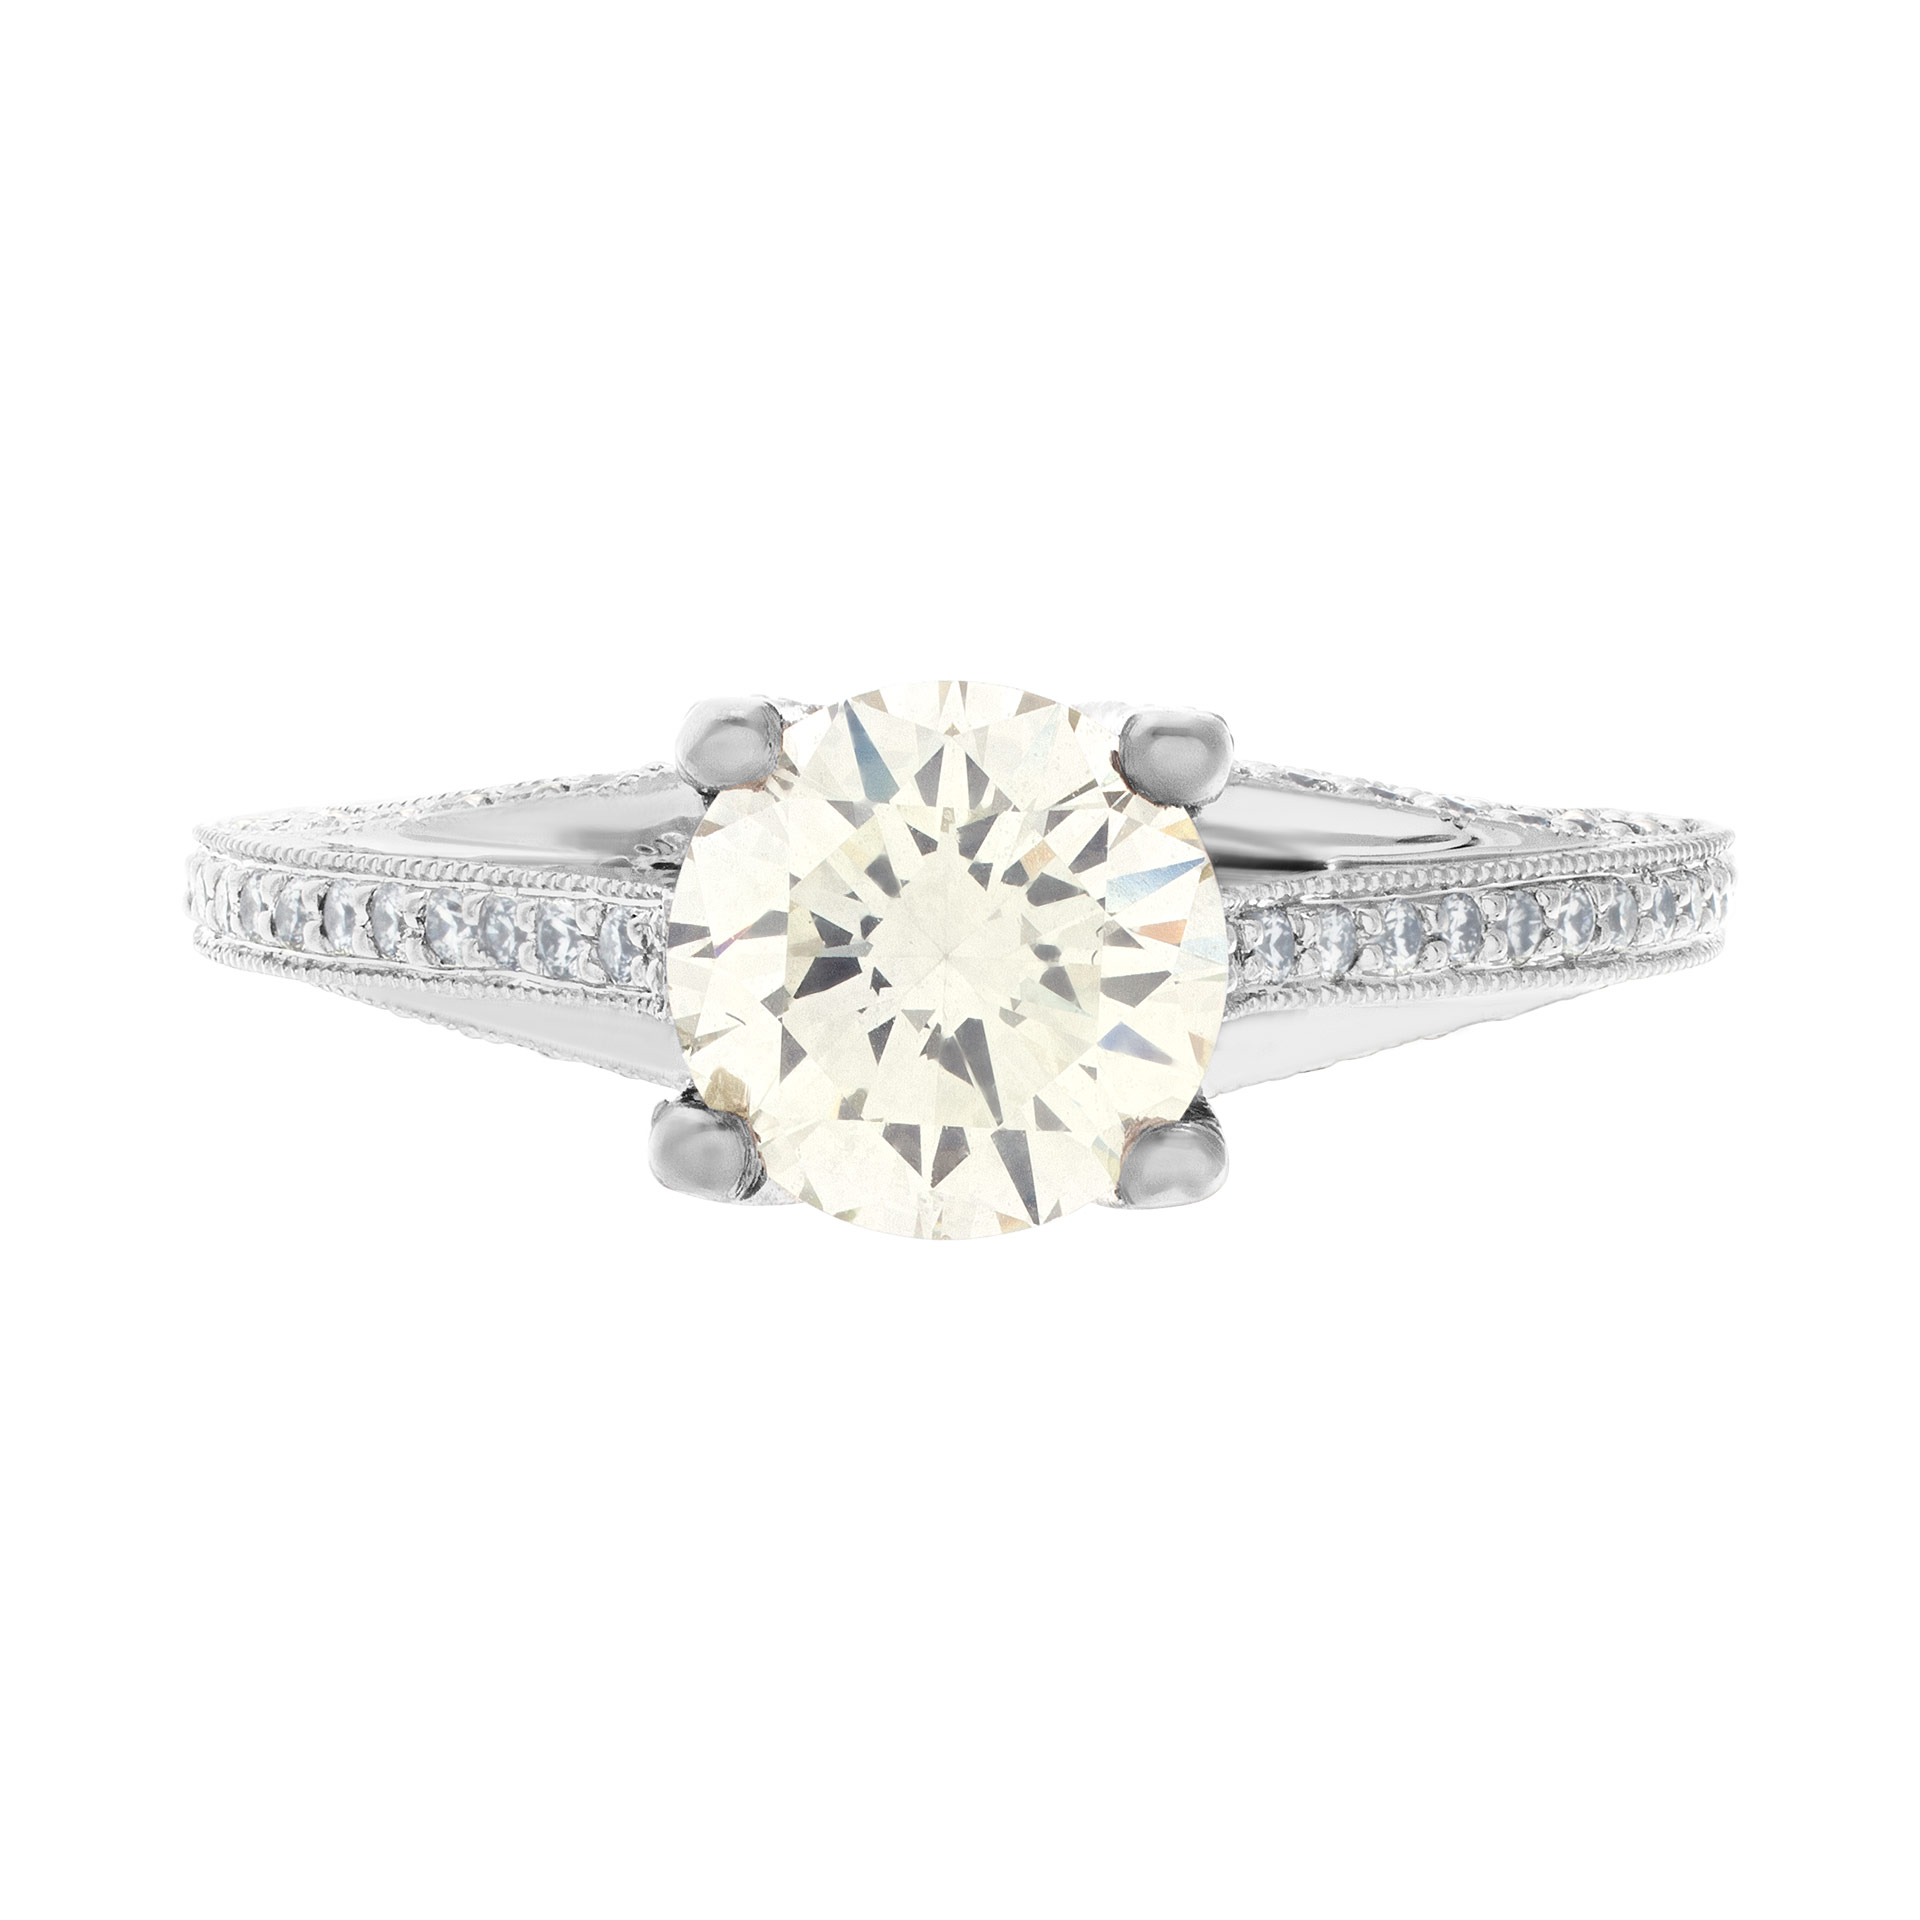 Gia Certified Diamond Ring 1.28 Cts (M Color, Si2 Clarity) In 18k White Gold Ritani Setting. image 1